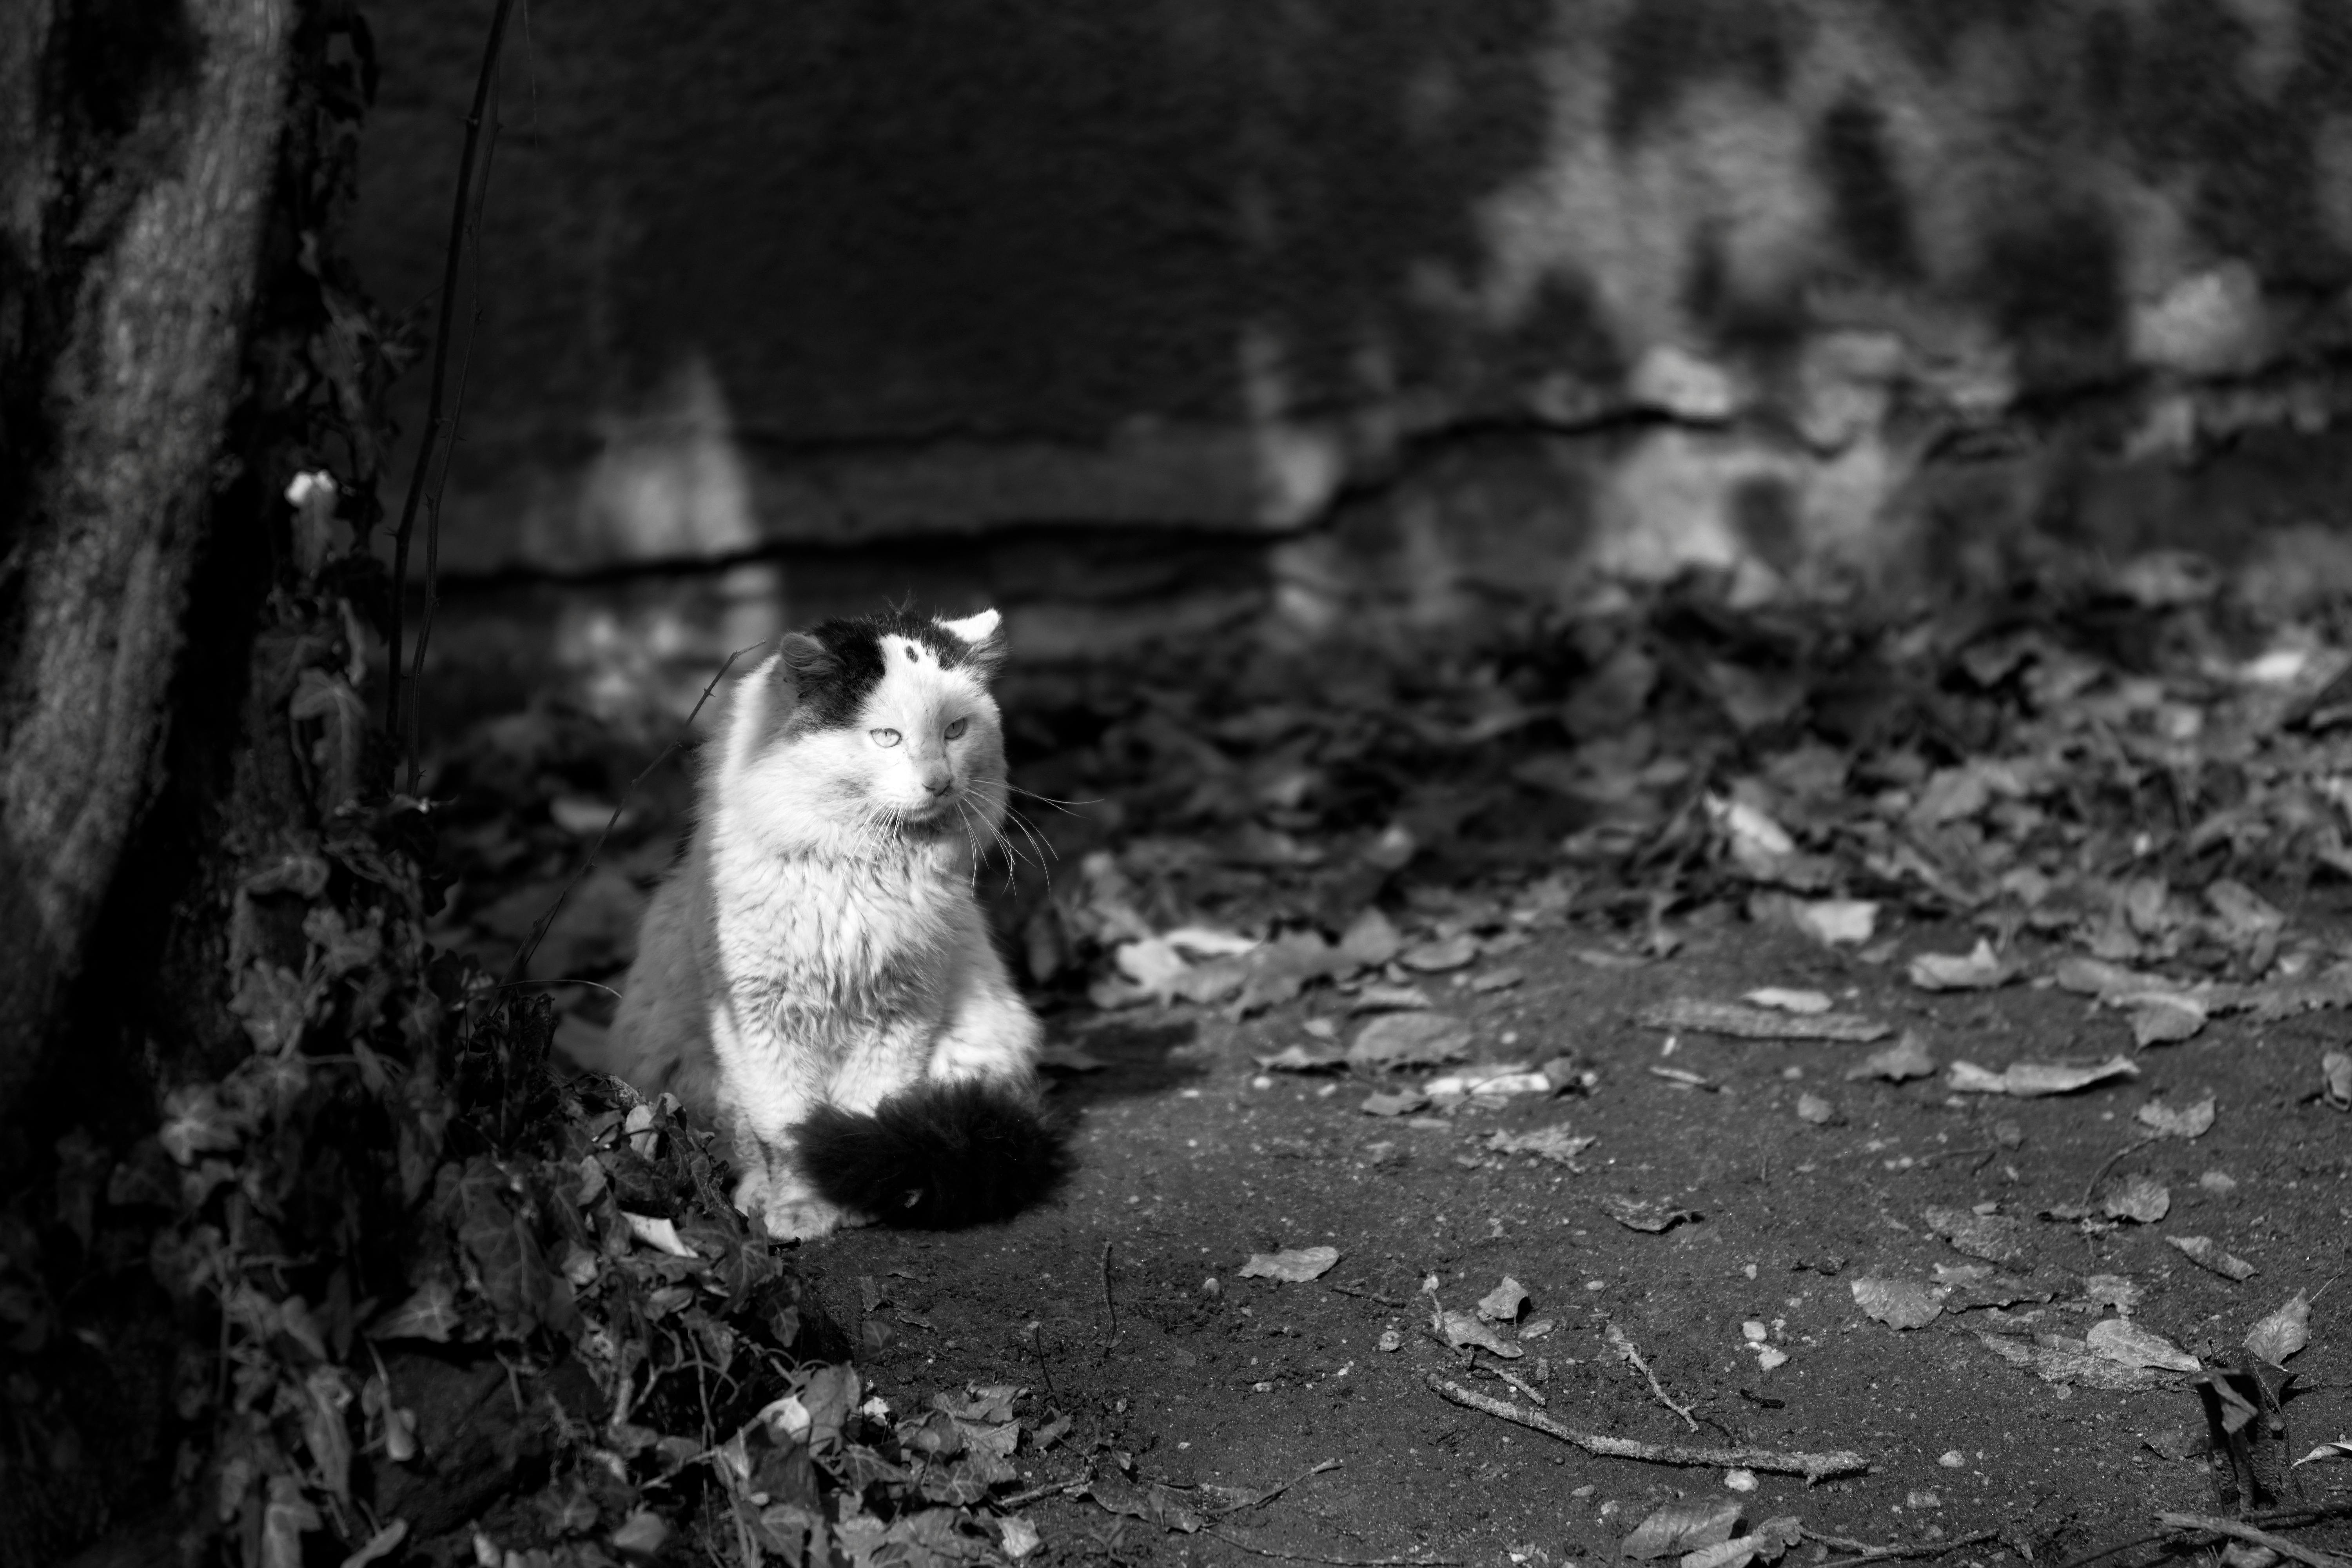 Free stock photo of animal, black and white, cat sitting on the ground